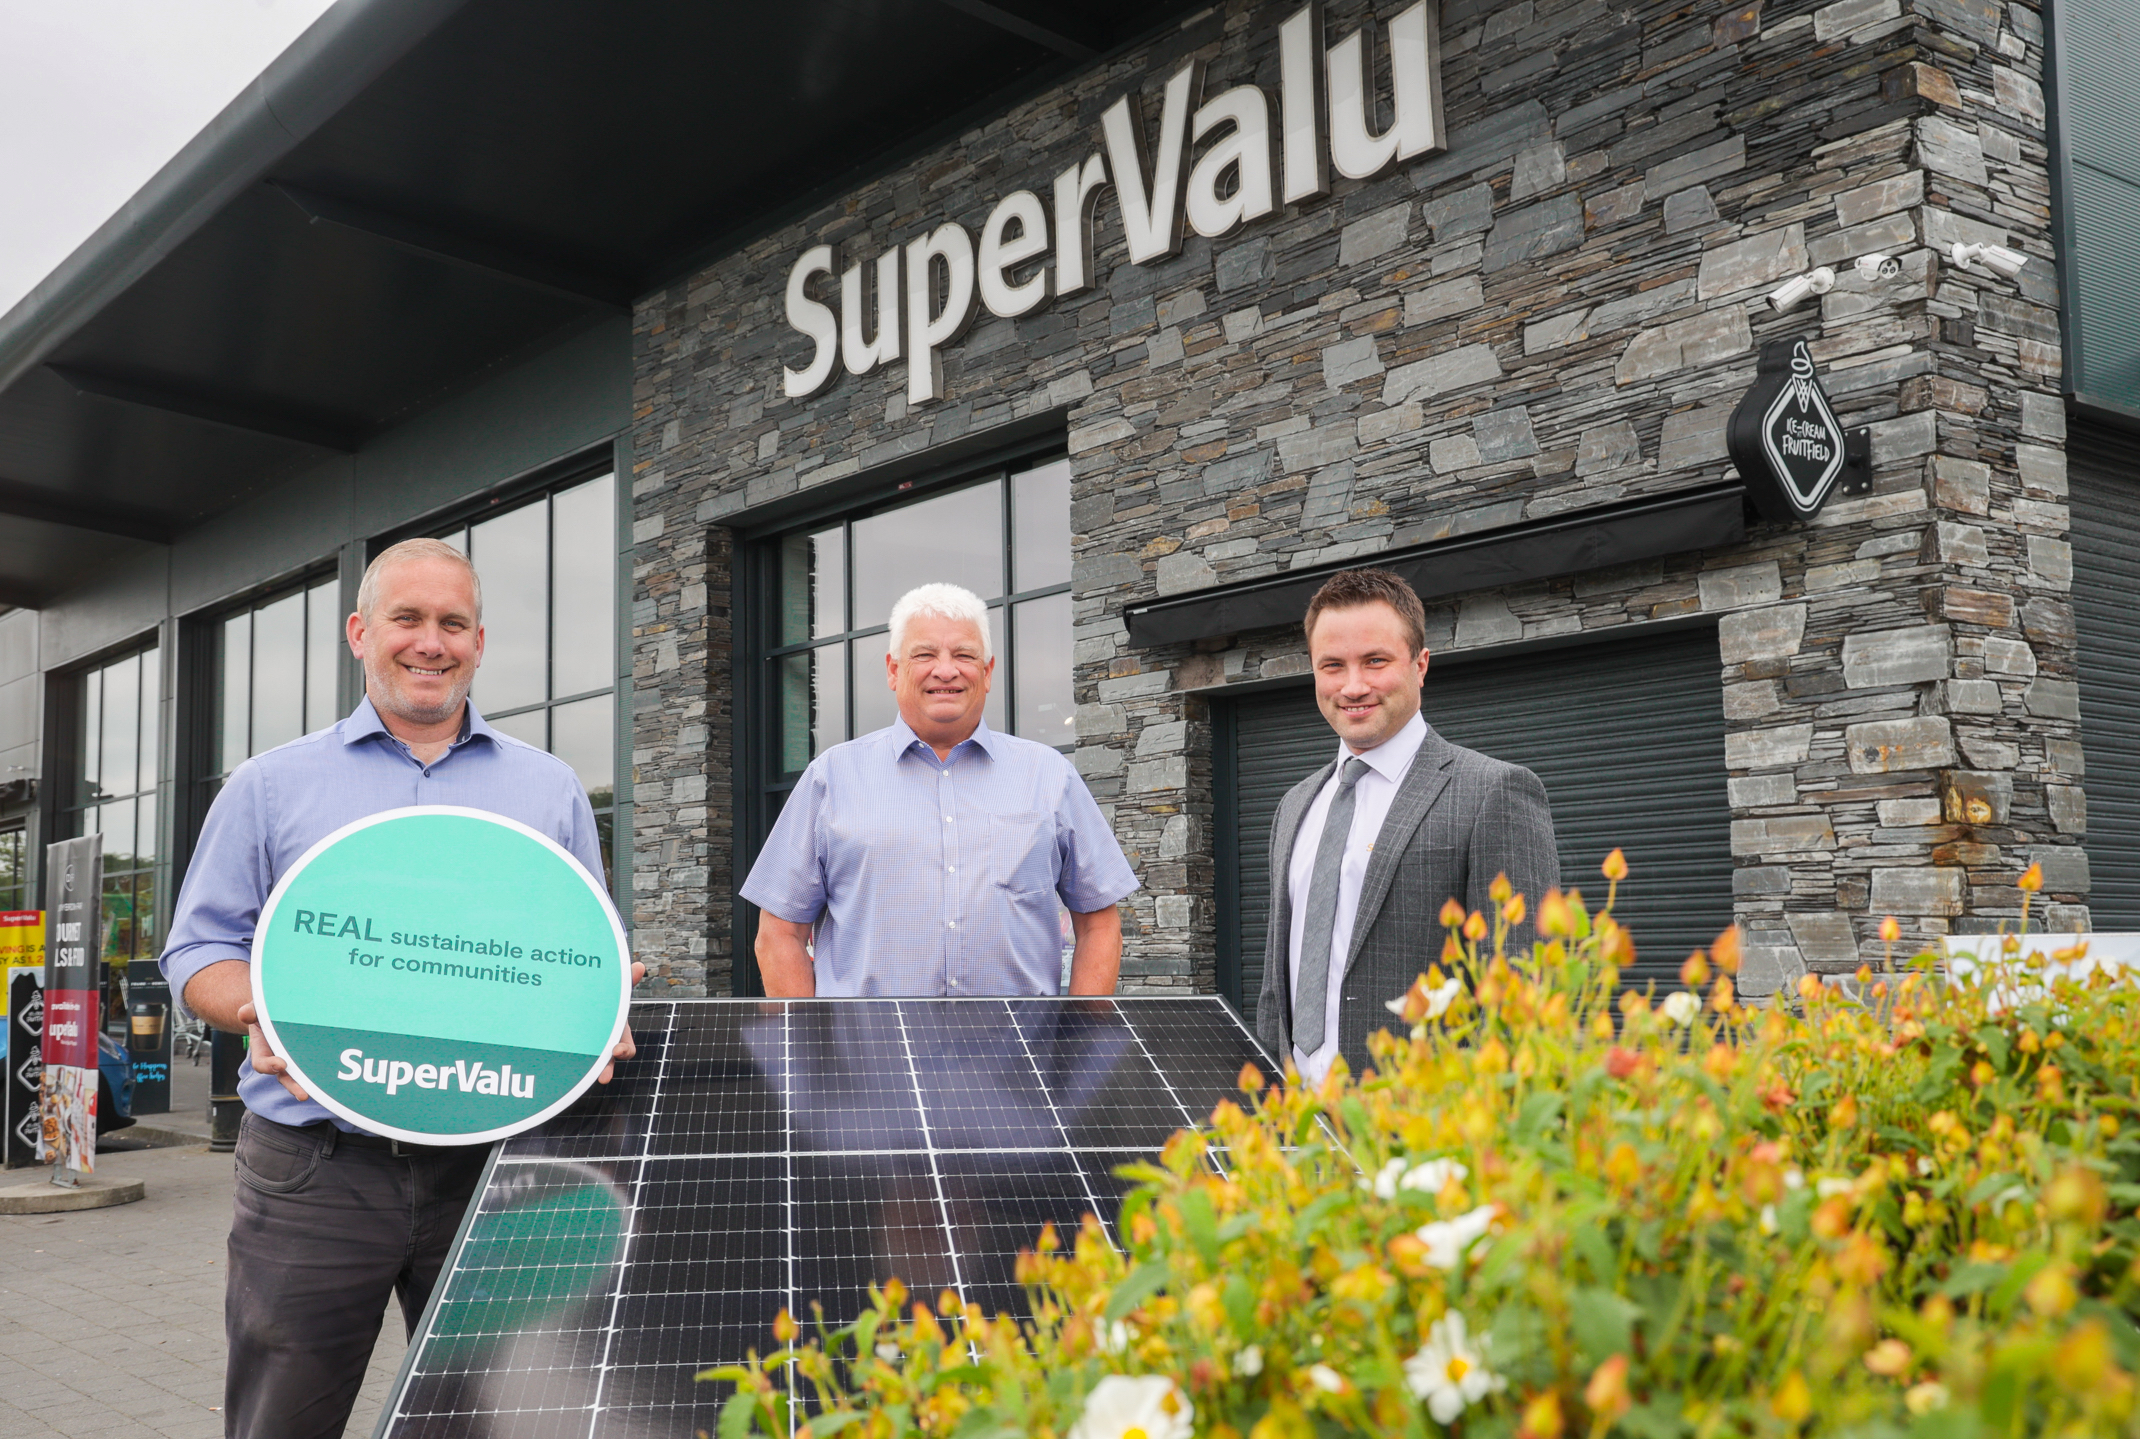 County Armagh retailer making strides in sustainability